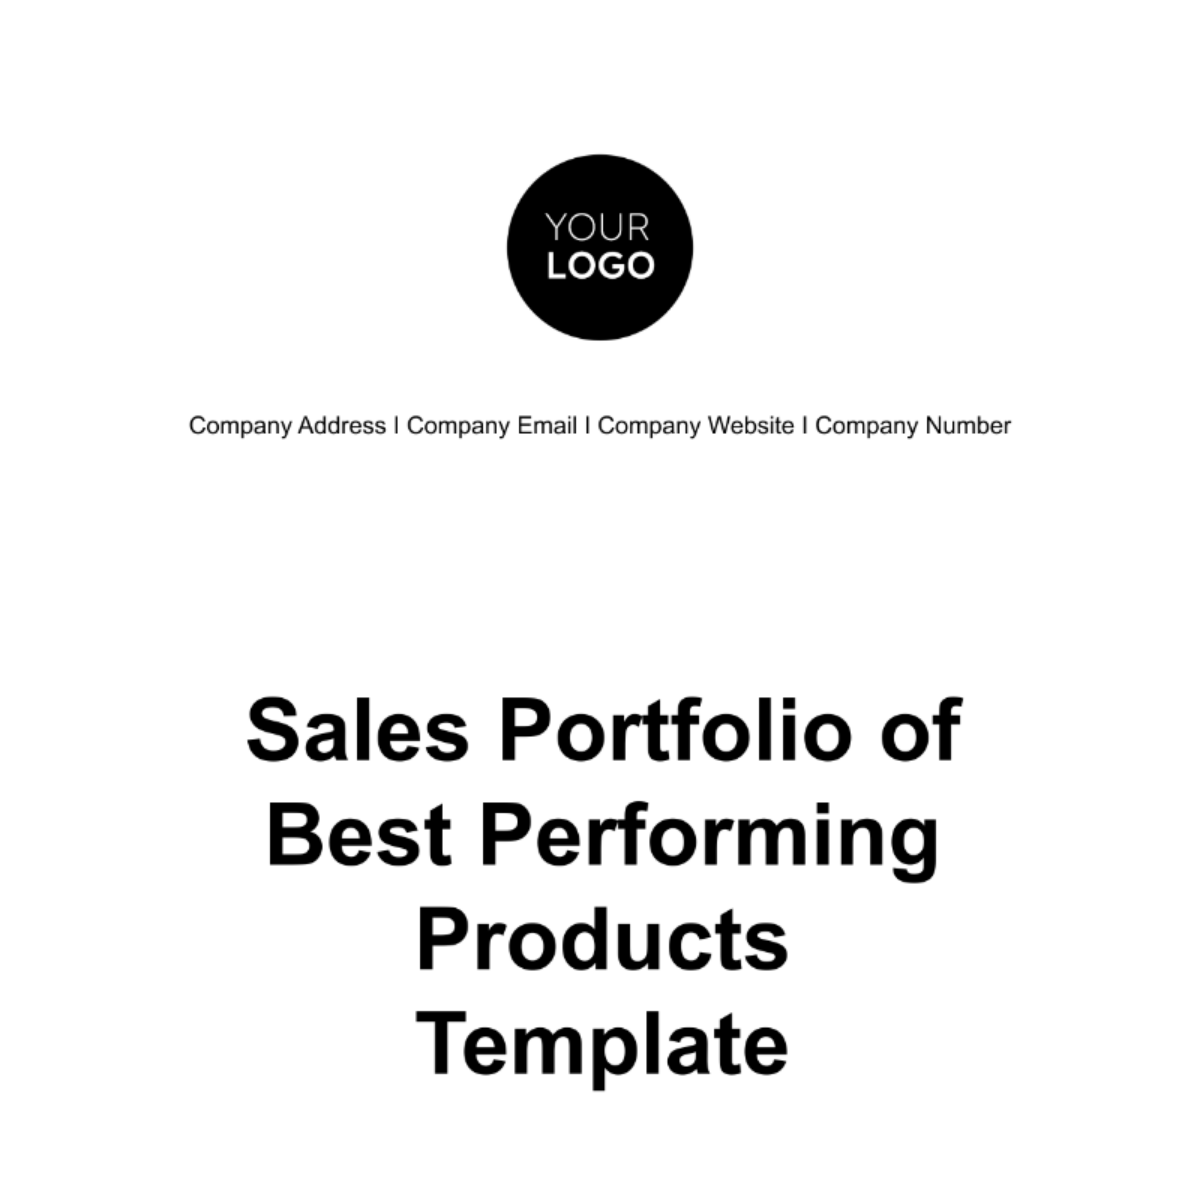 Free Sales Portfolio of Best Performing Products Template